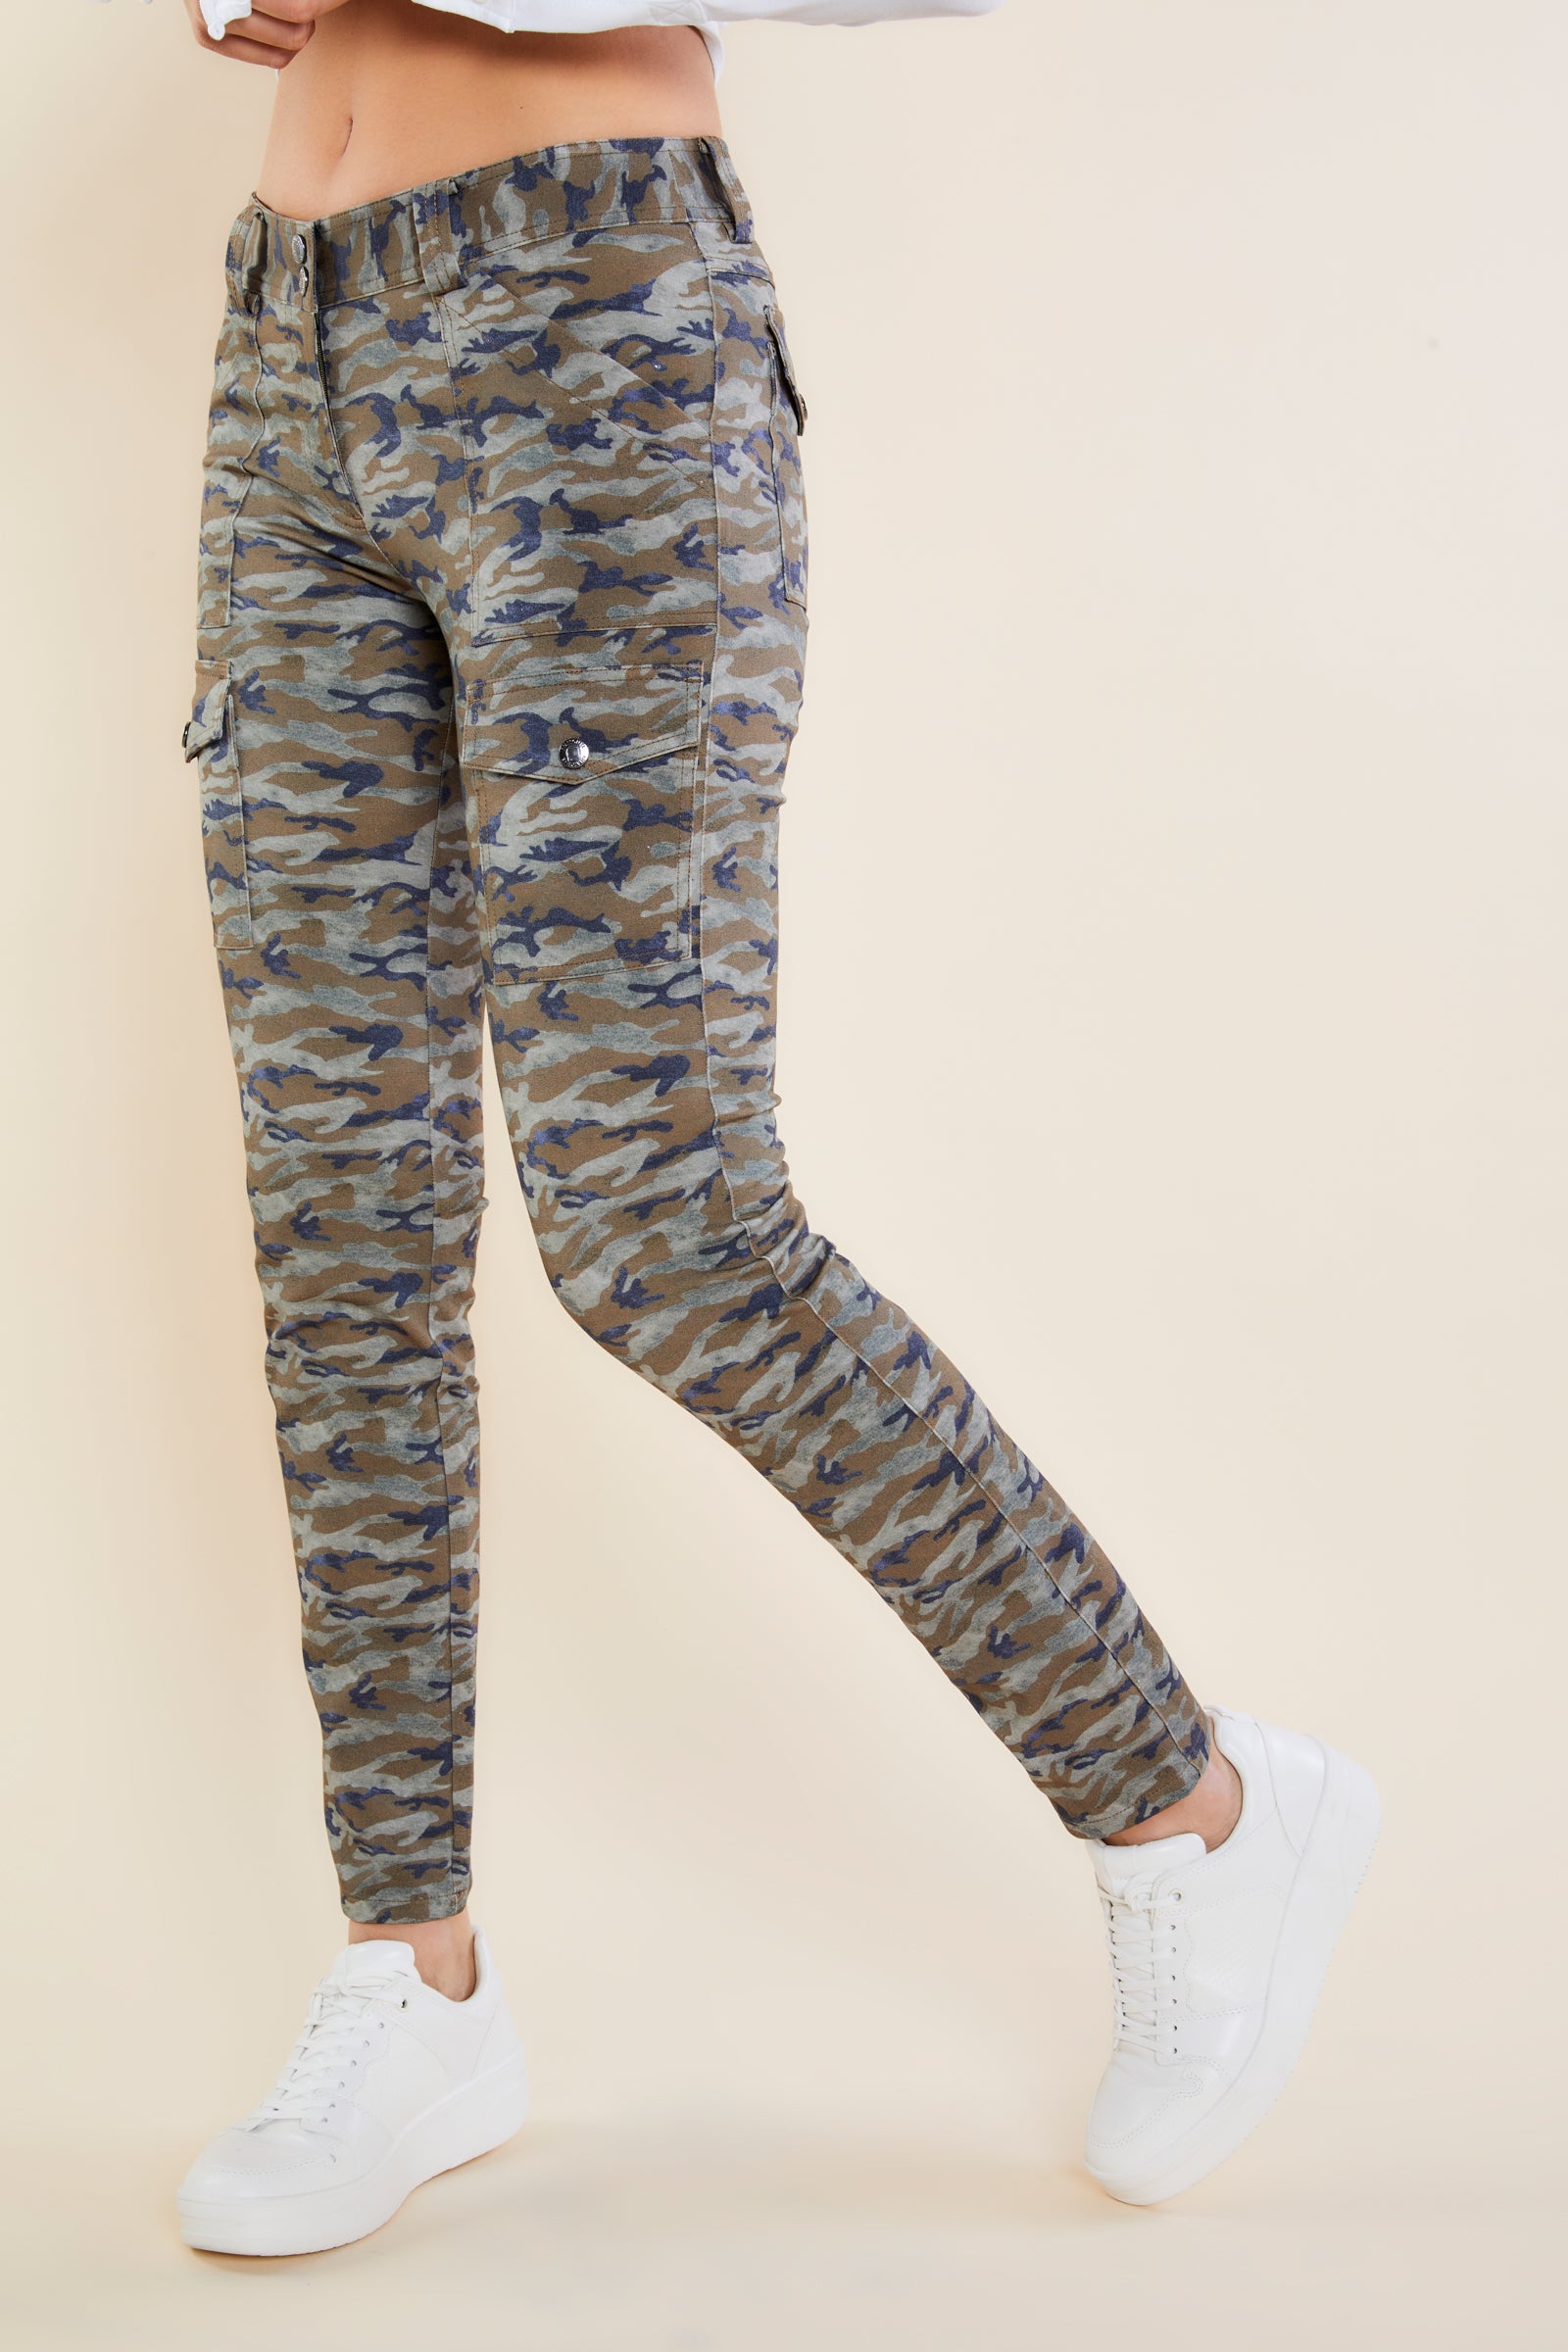 Lady Camouflage See Through Mesh Leggings Skinny Pants Stretchy